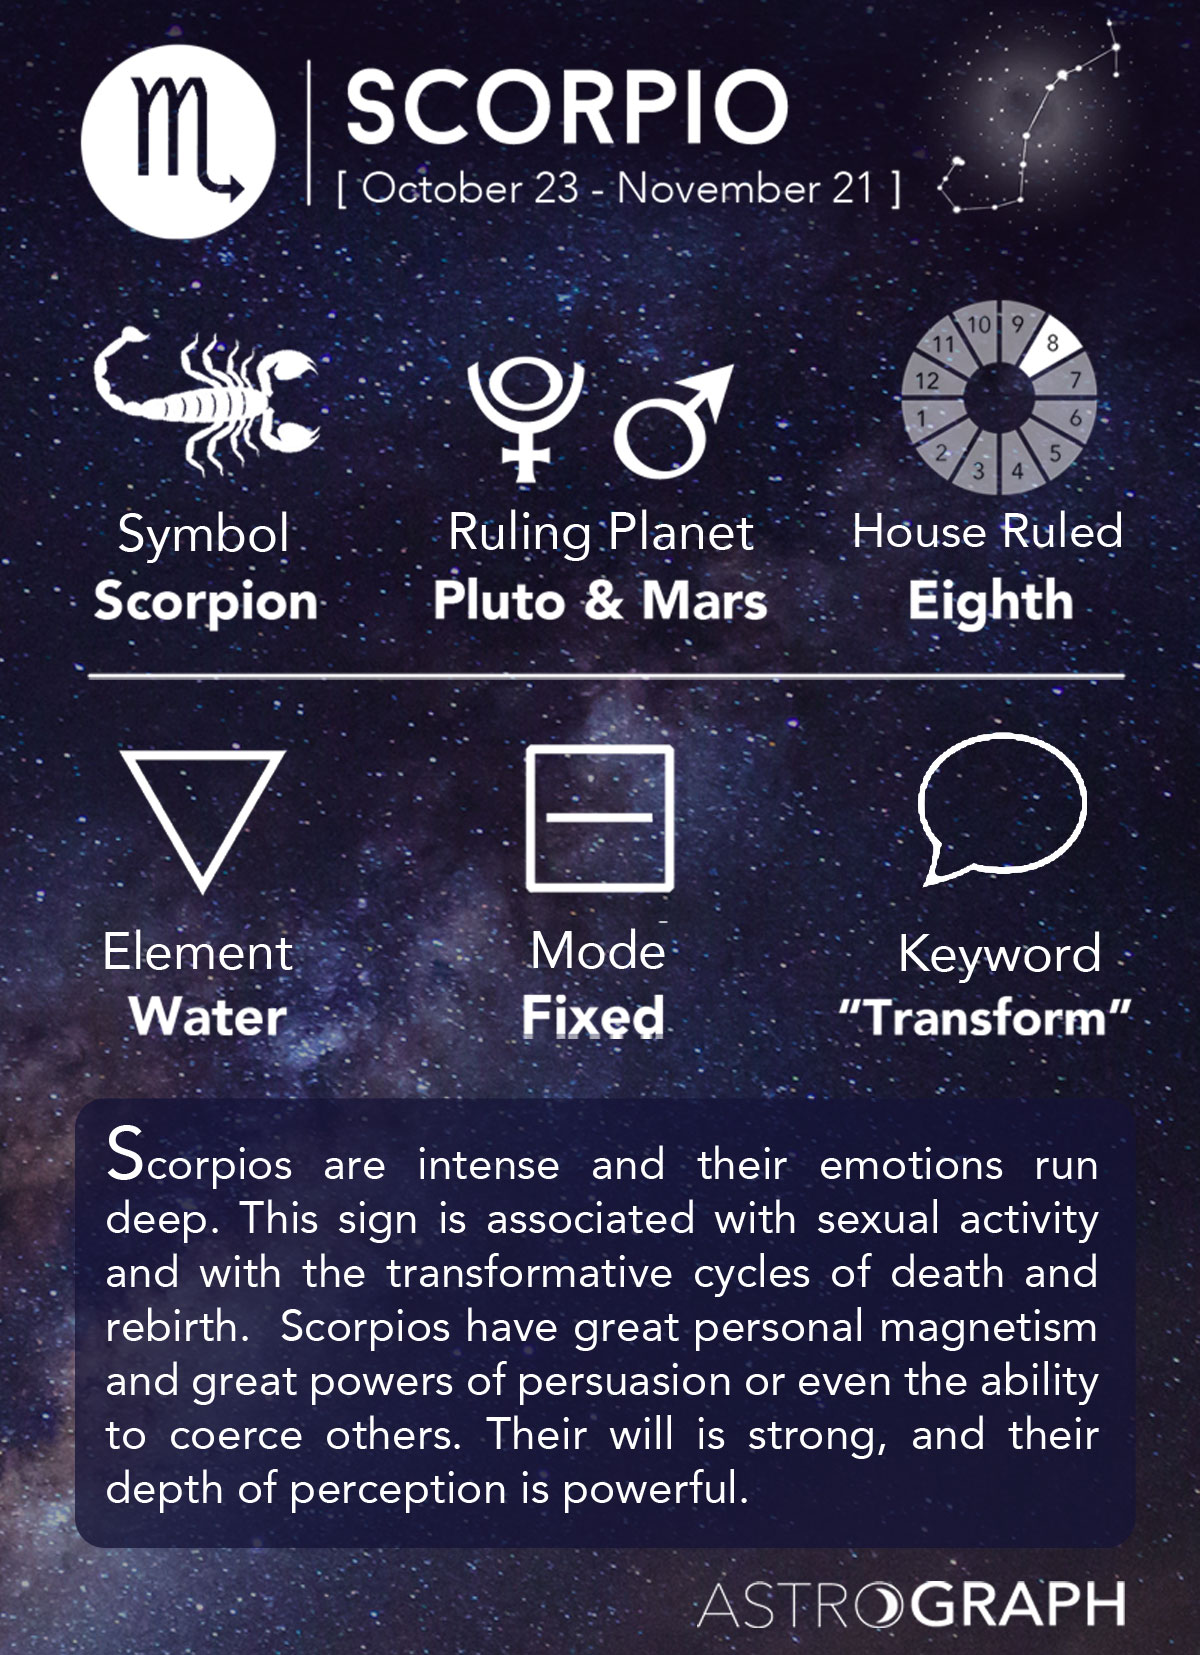 Whats does Scorpio mean?